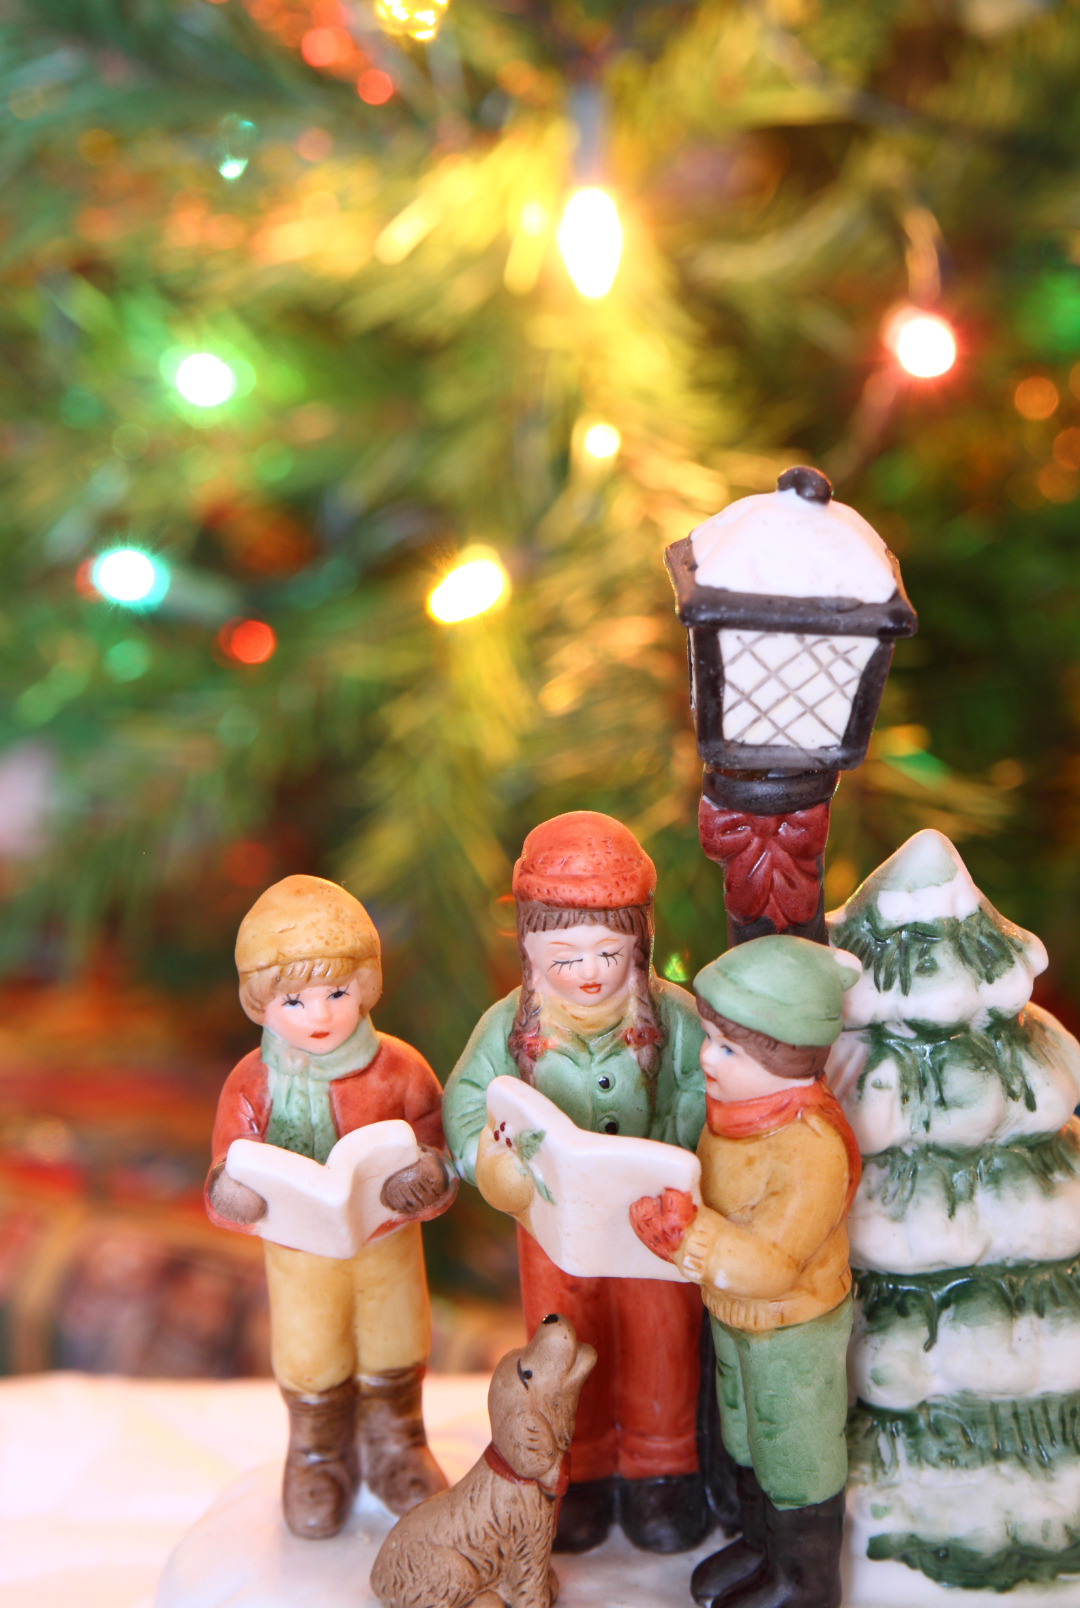 figurines of a girl and 2 boys singing holiday carols. A dog figurine looks up at them. There's a Christmas tree in the background with coloured lights.